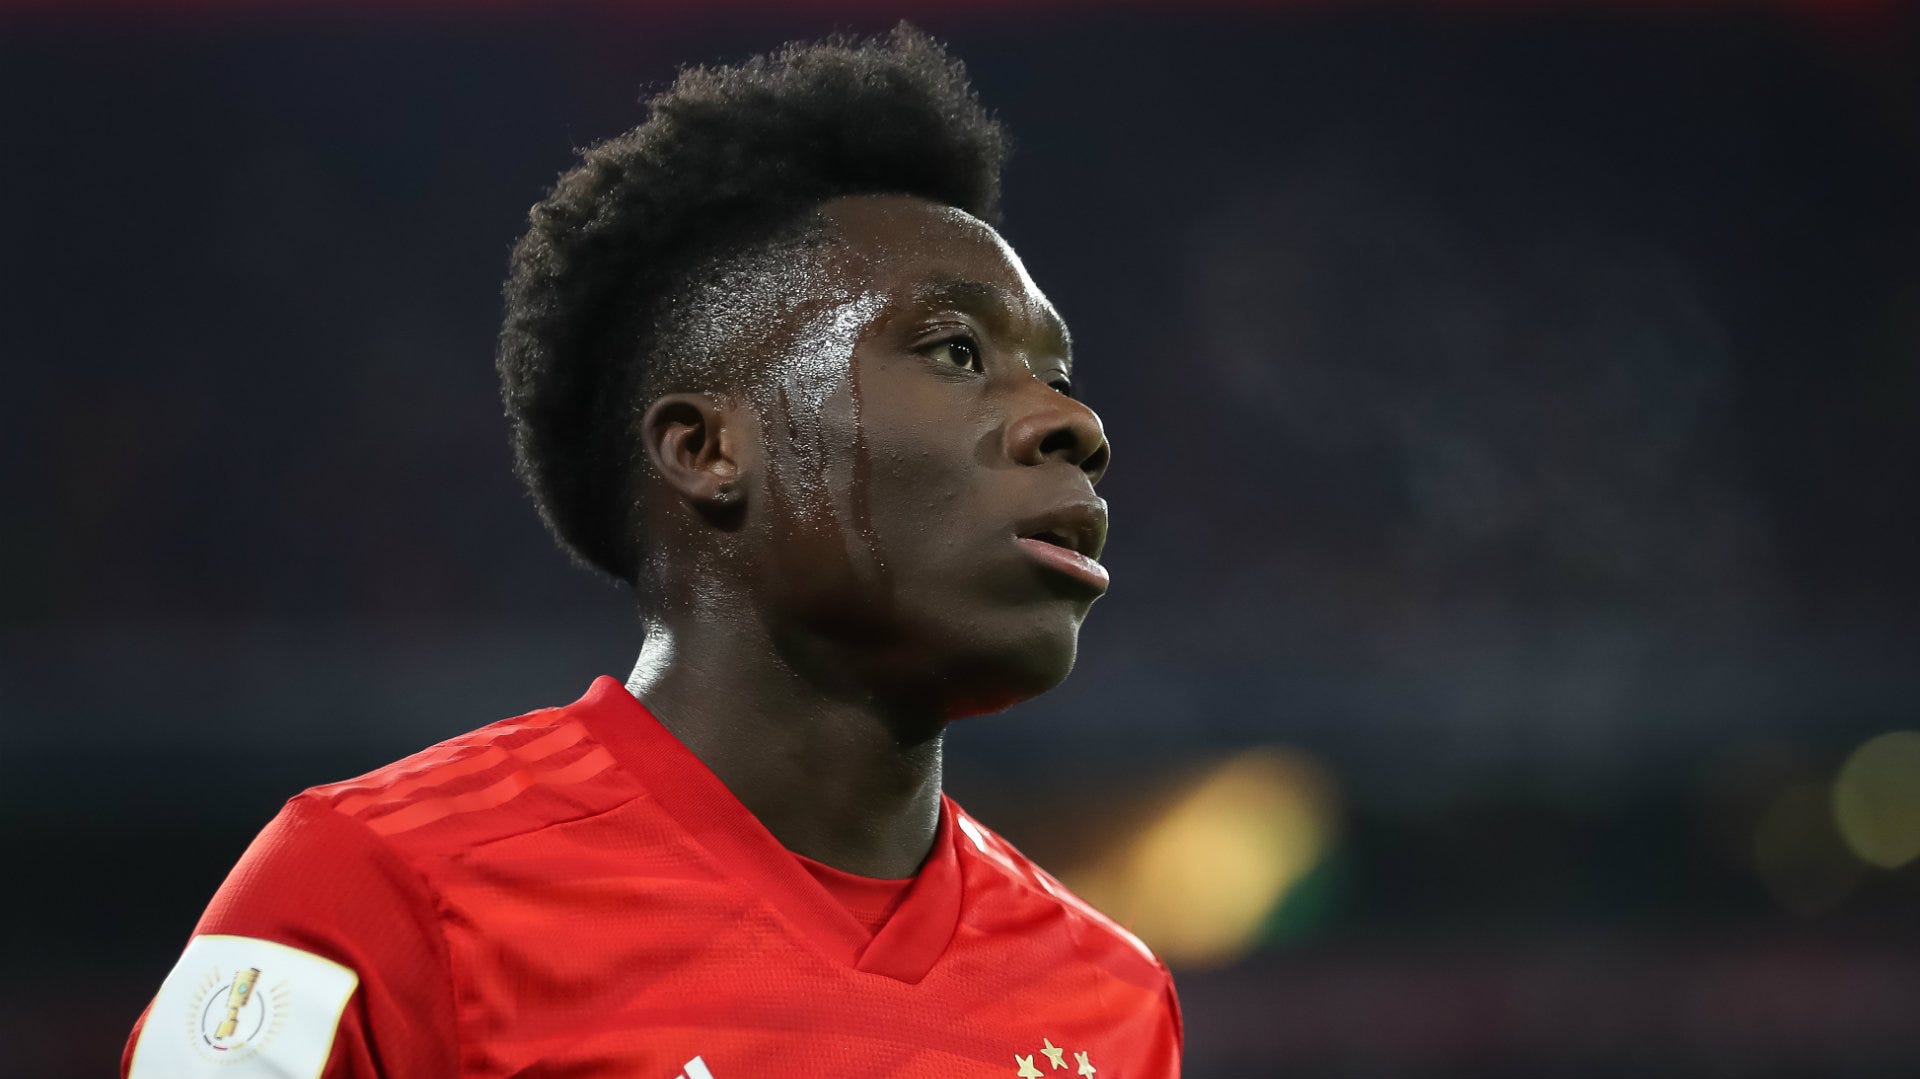 Arsenal weighed up move for Alphonso Davies pre-Bayern